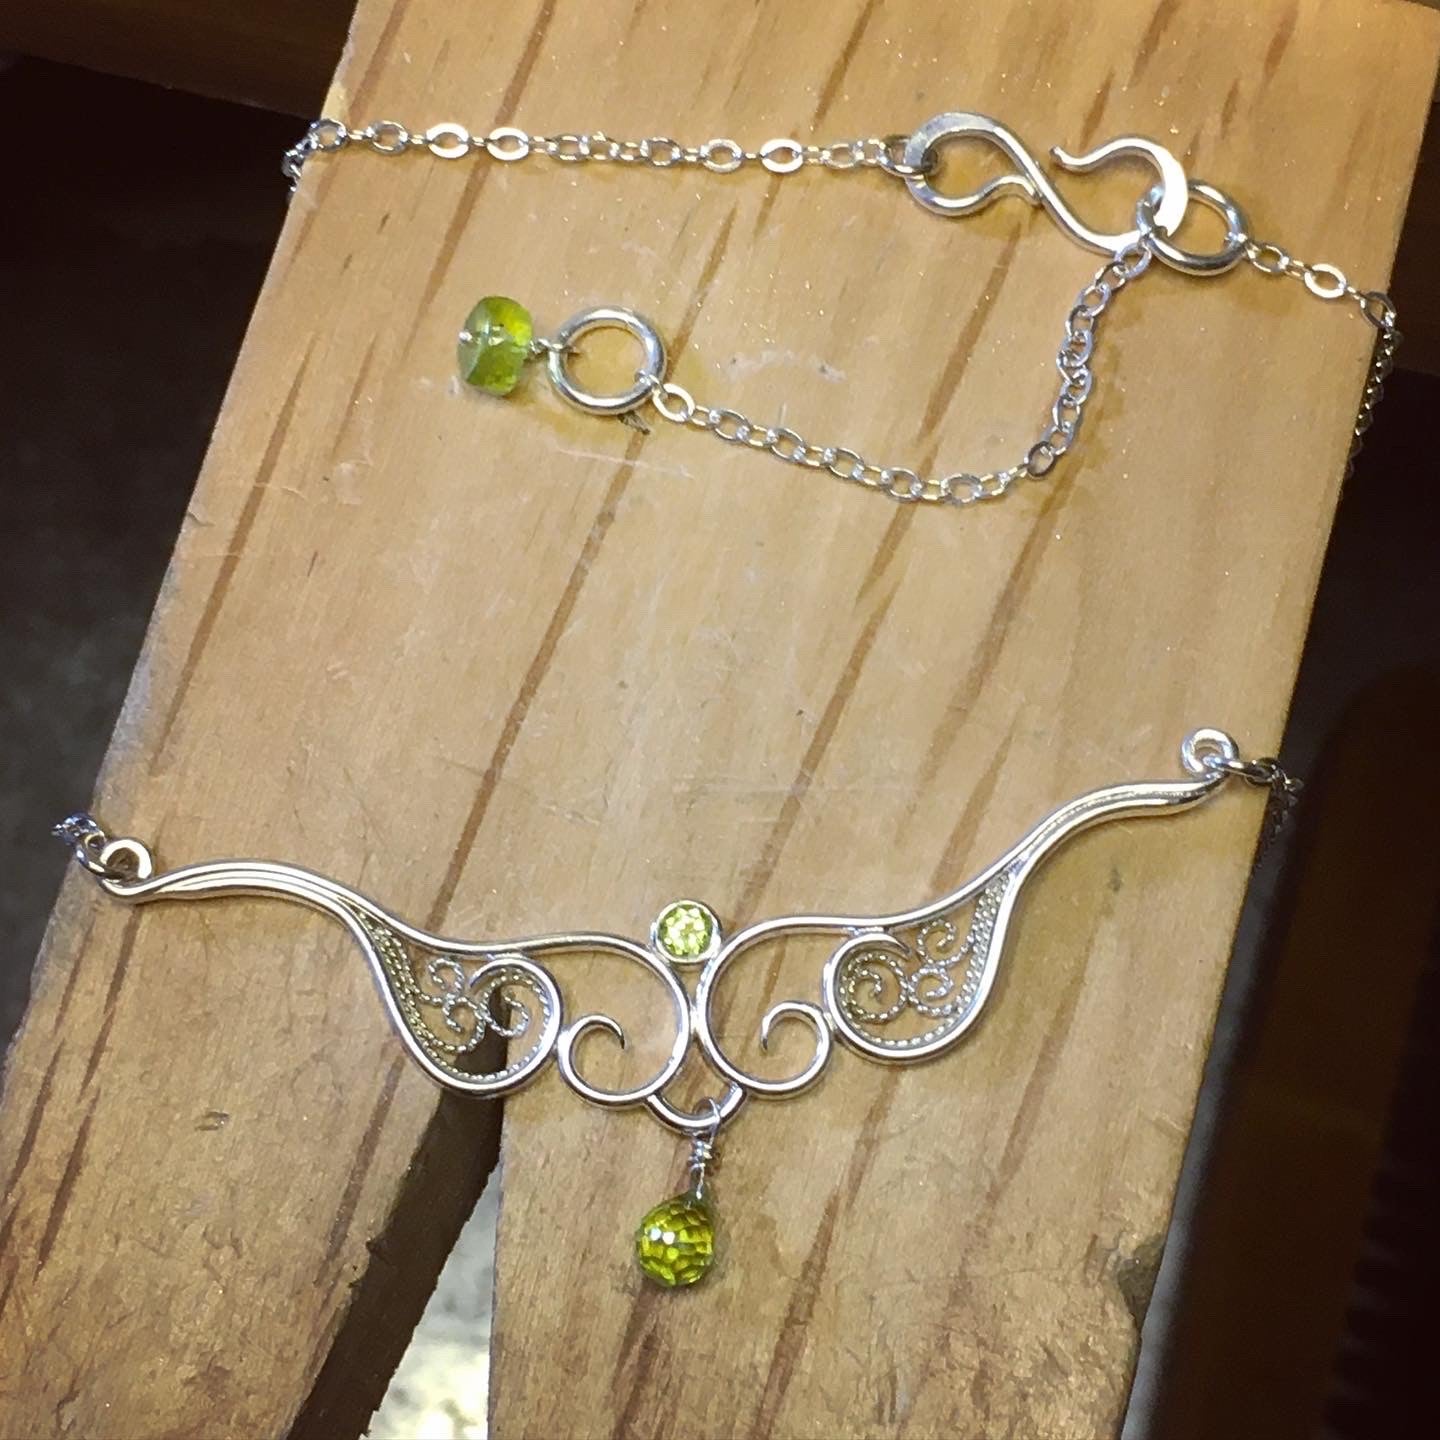 A graceful silver necklace with delicate filigree wirework, accented with green peridot, on a wooden jeweler's bench pin.